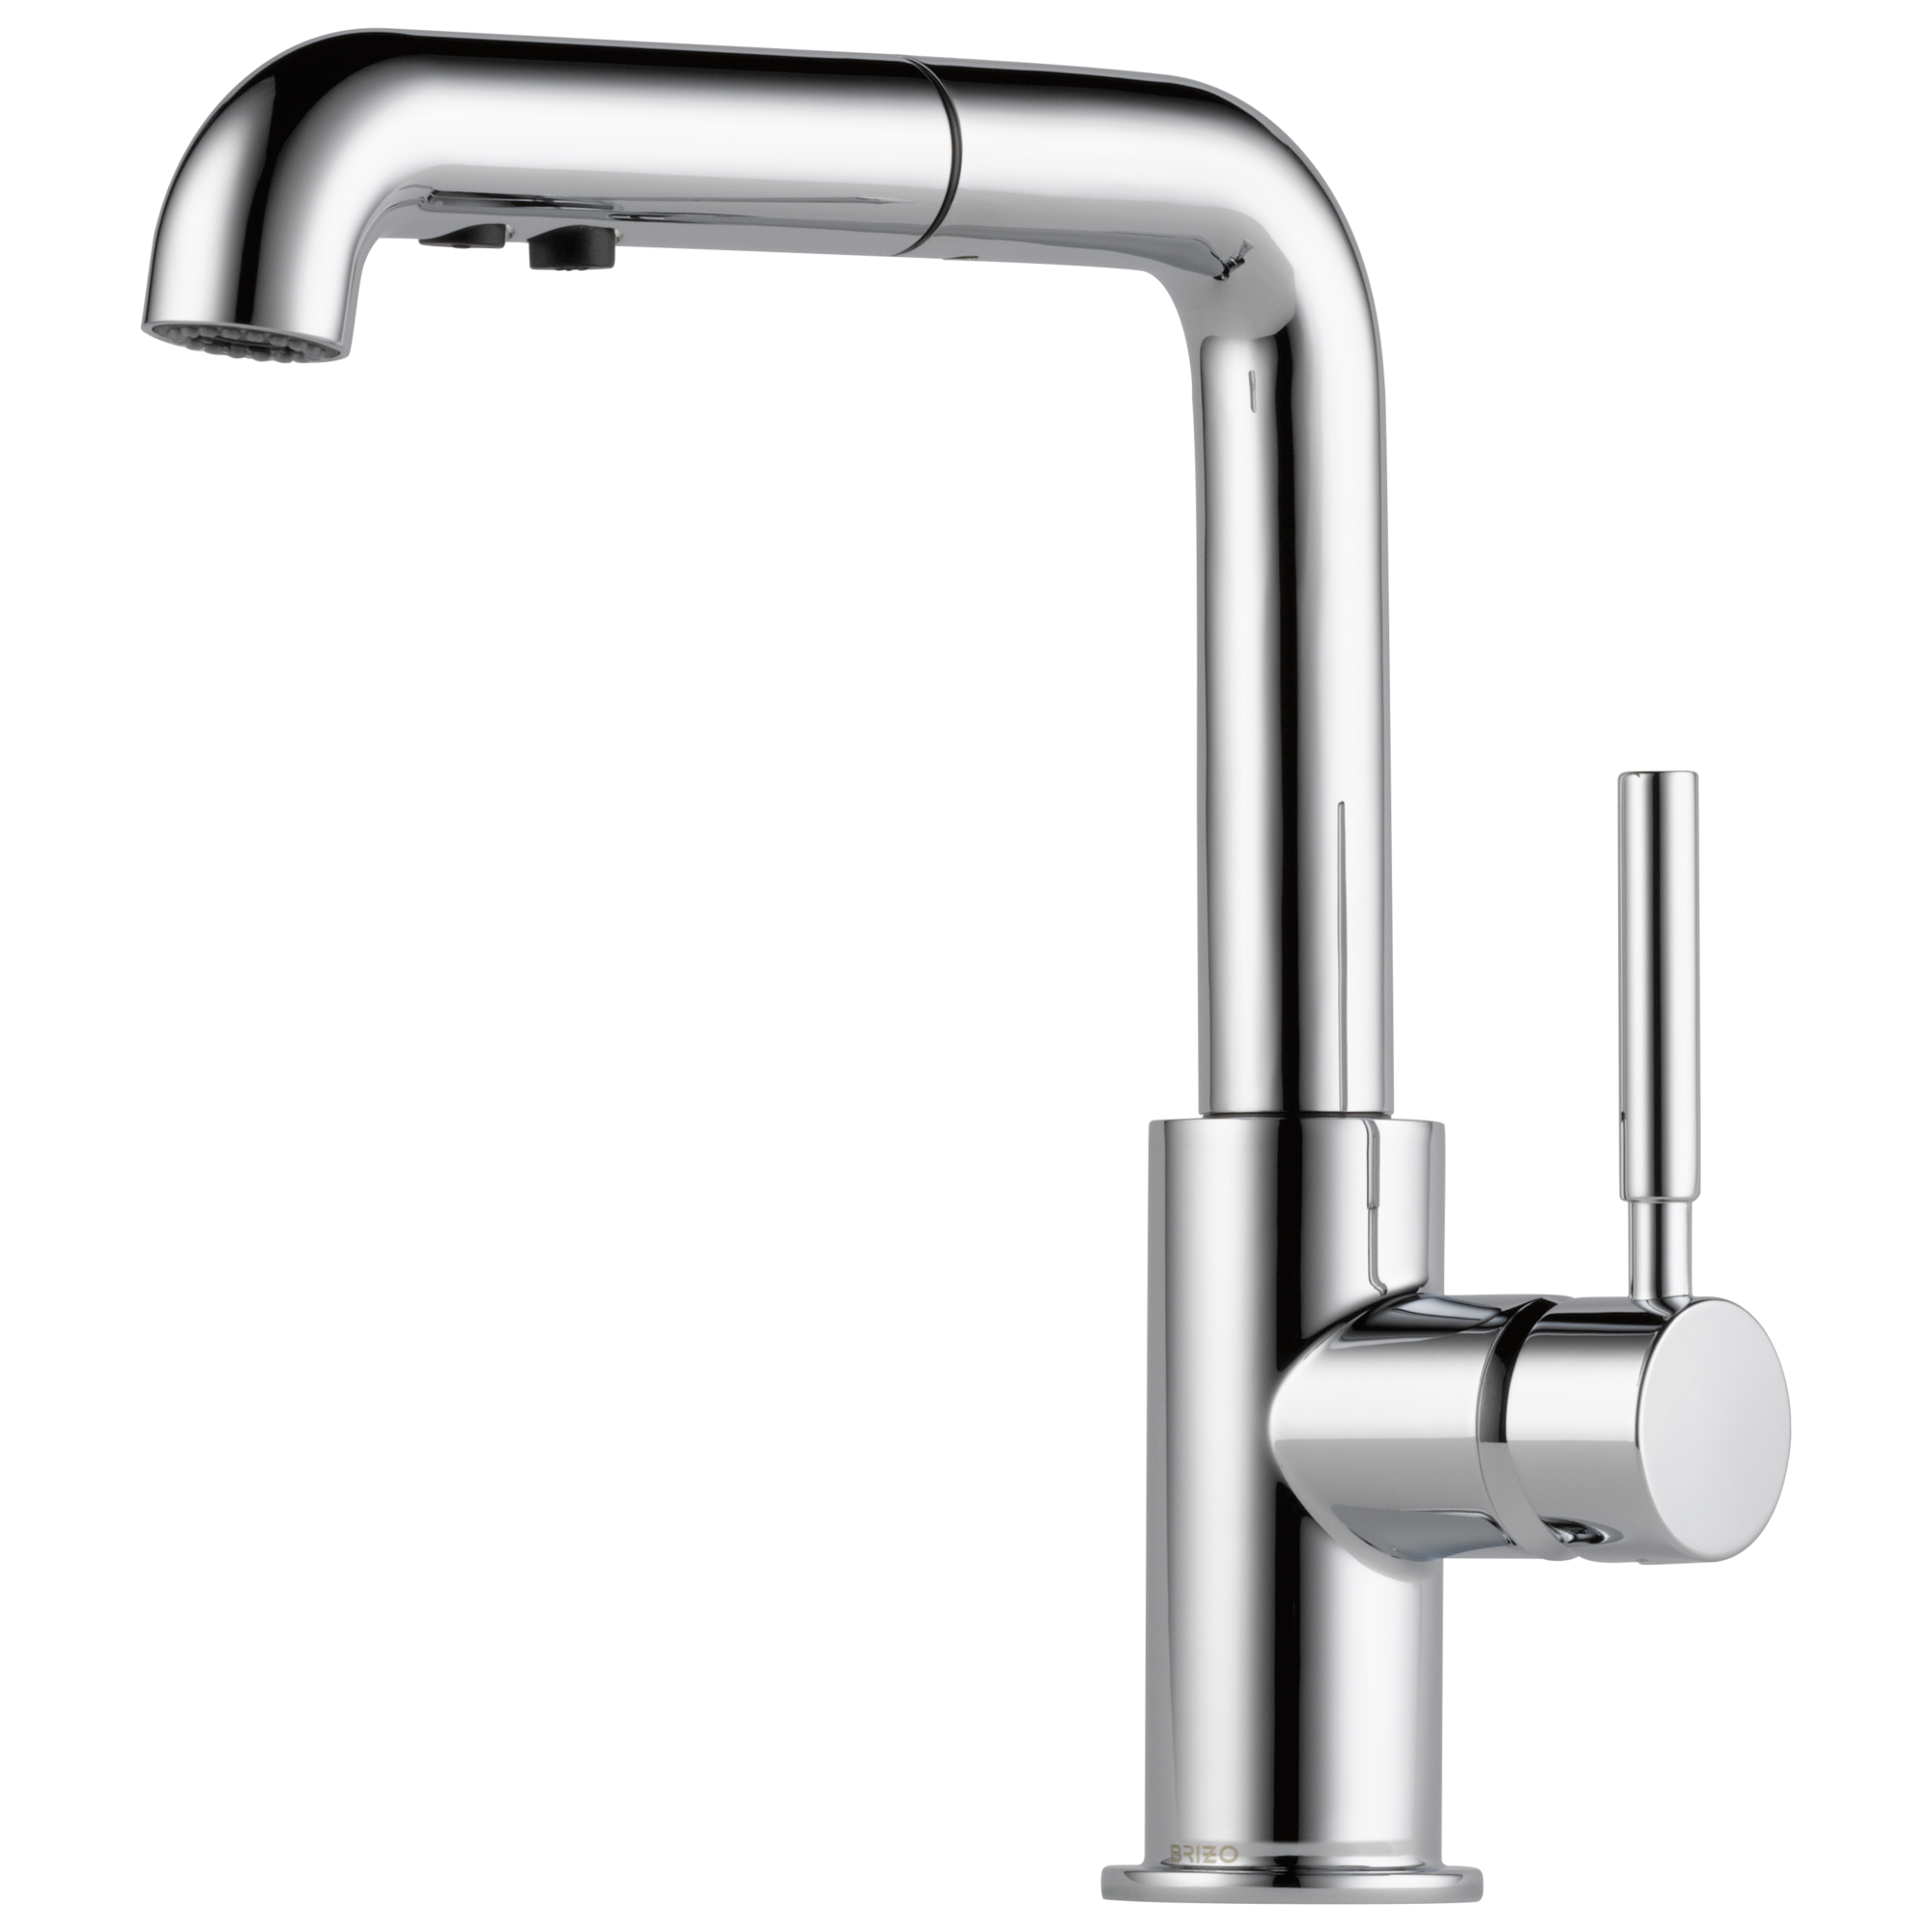 Brizo Solna: Single Handle Pull-Out Kitchen Faucet